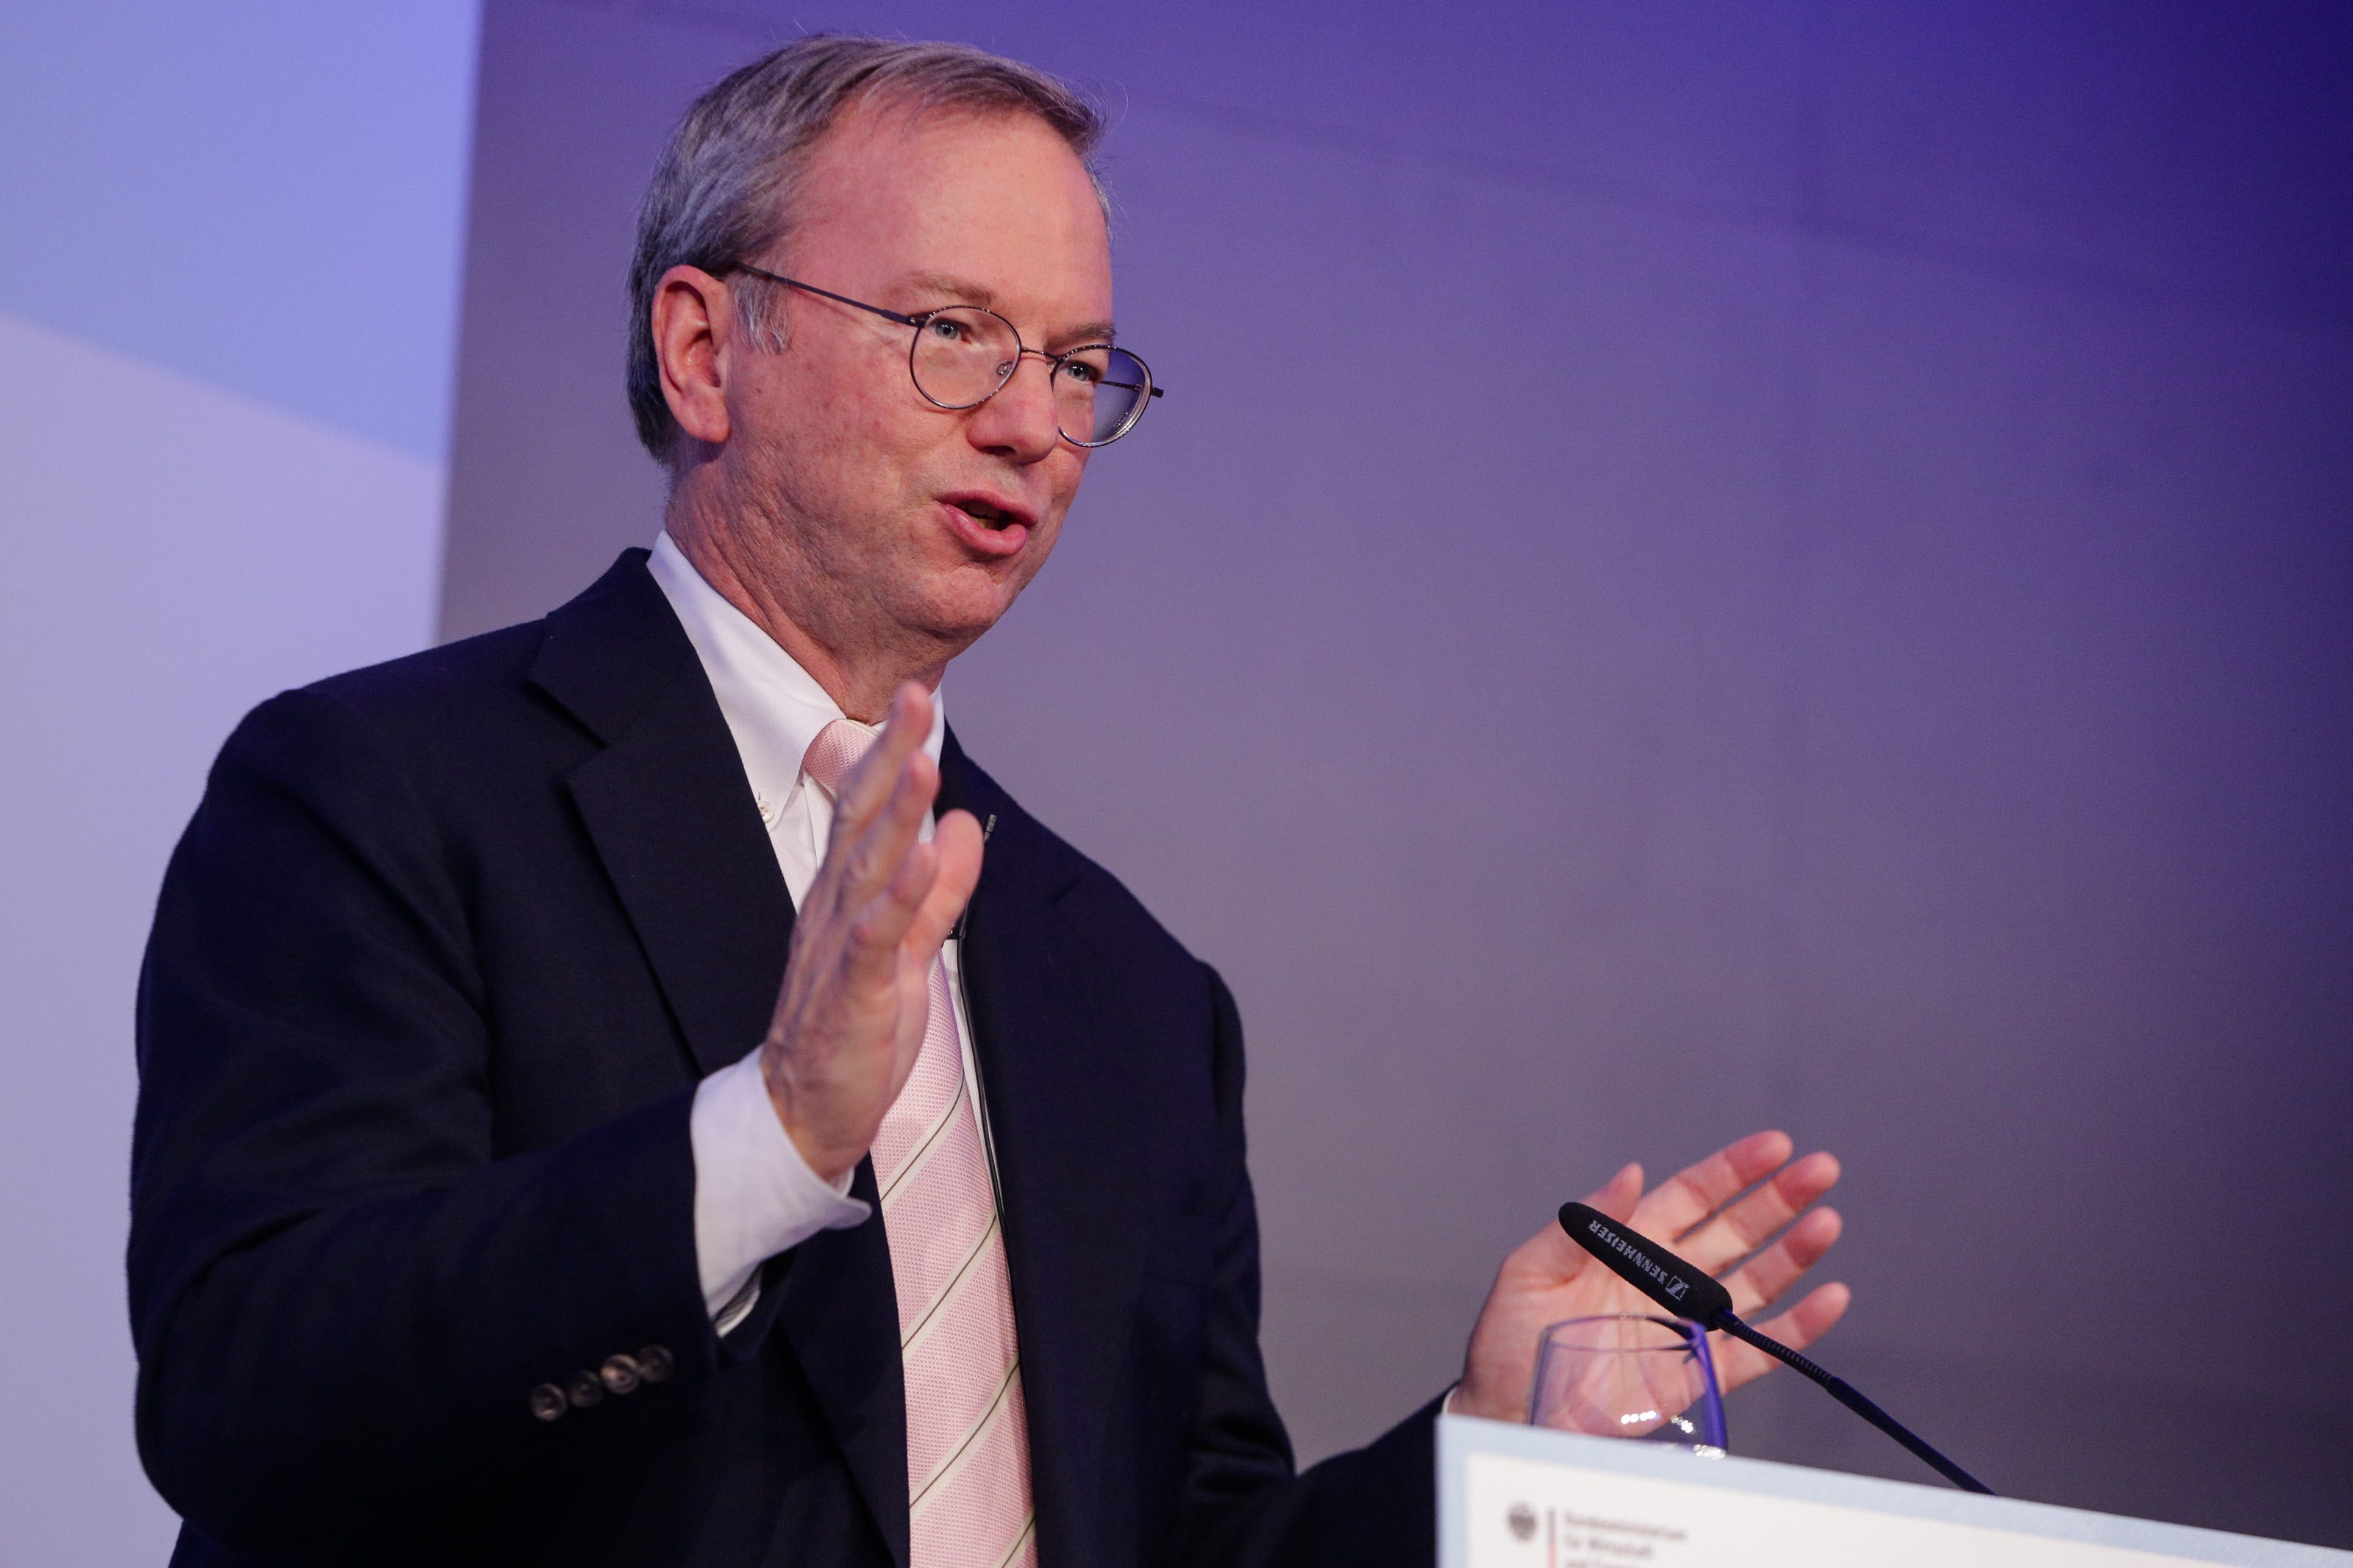 microsoft, eric schmidt says china can't catch up to us in ai for 4 reasons